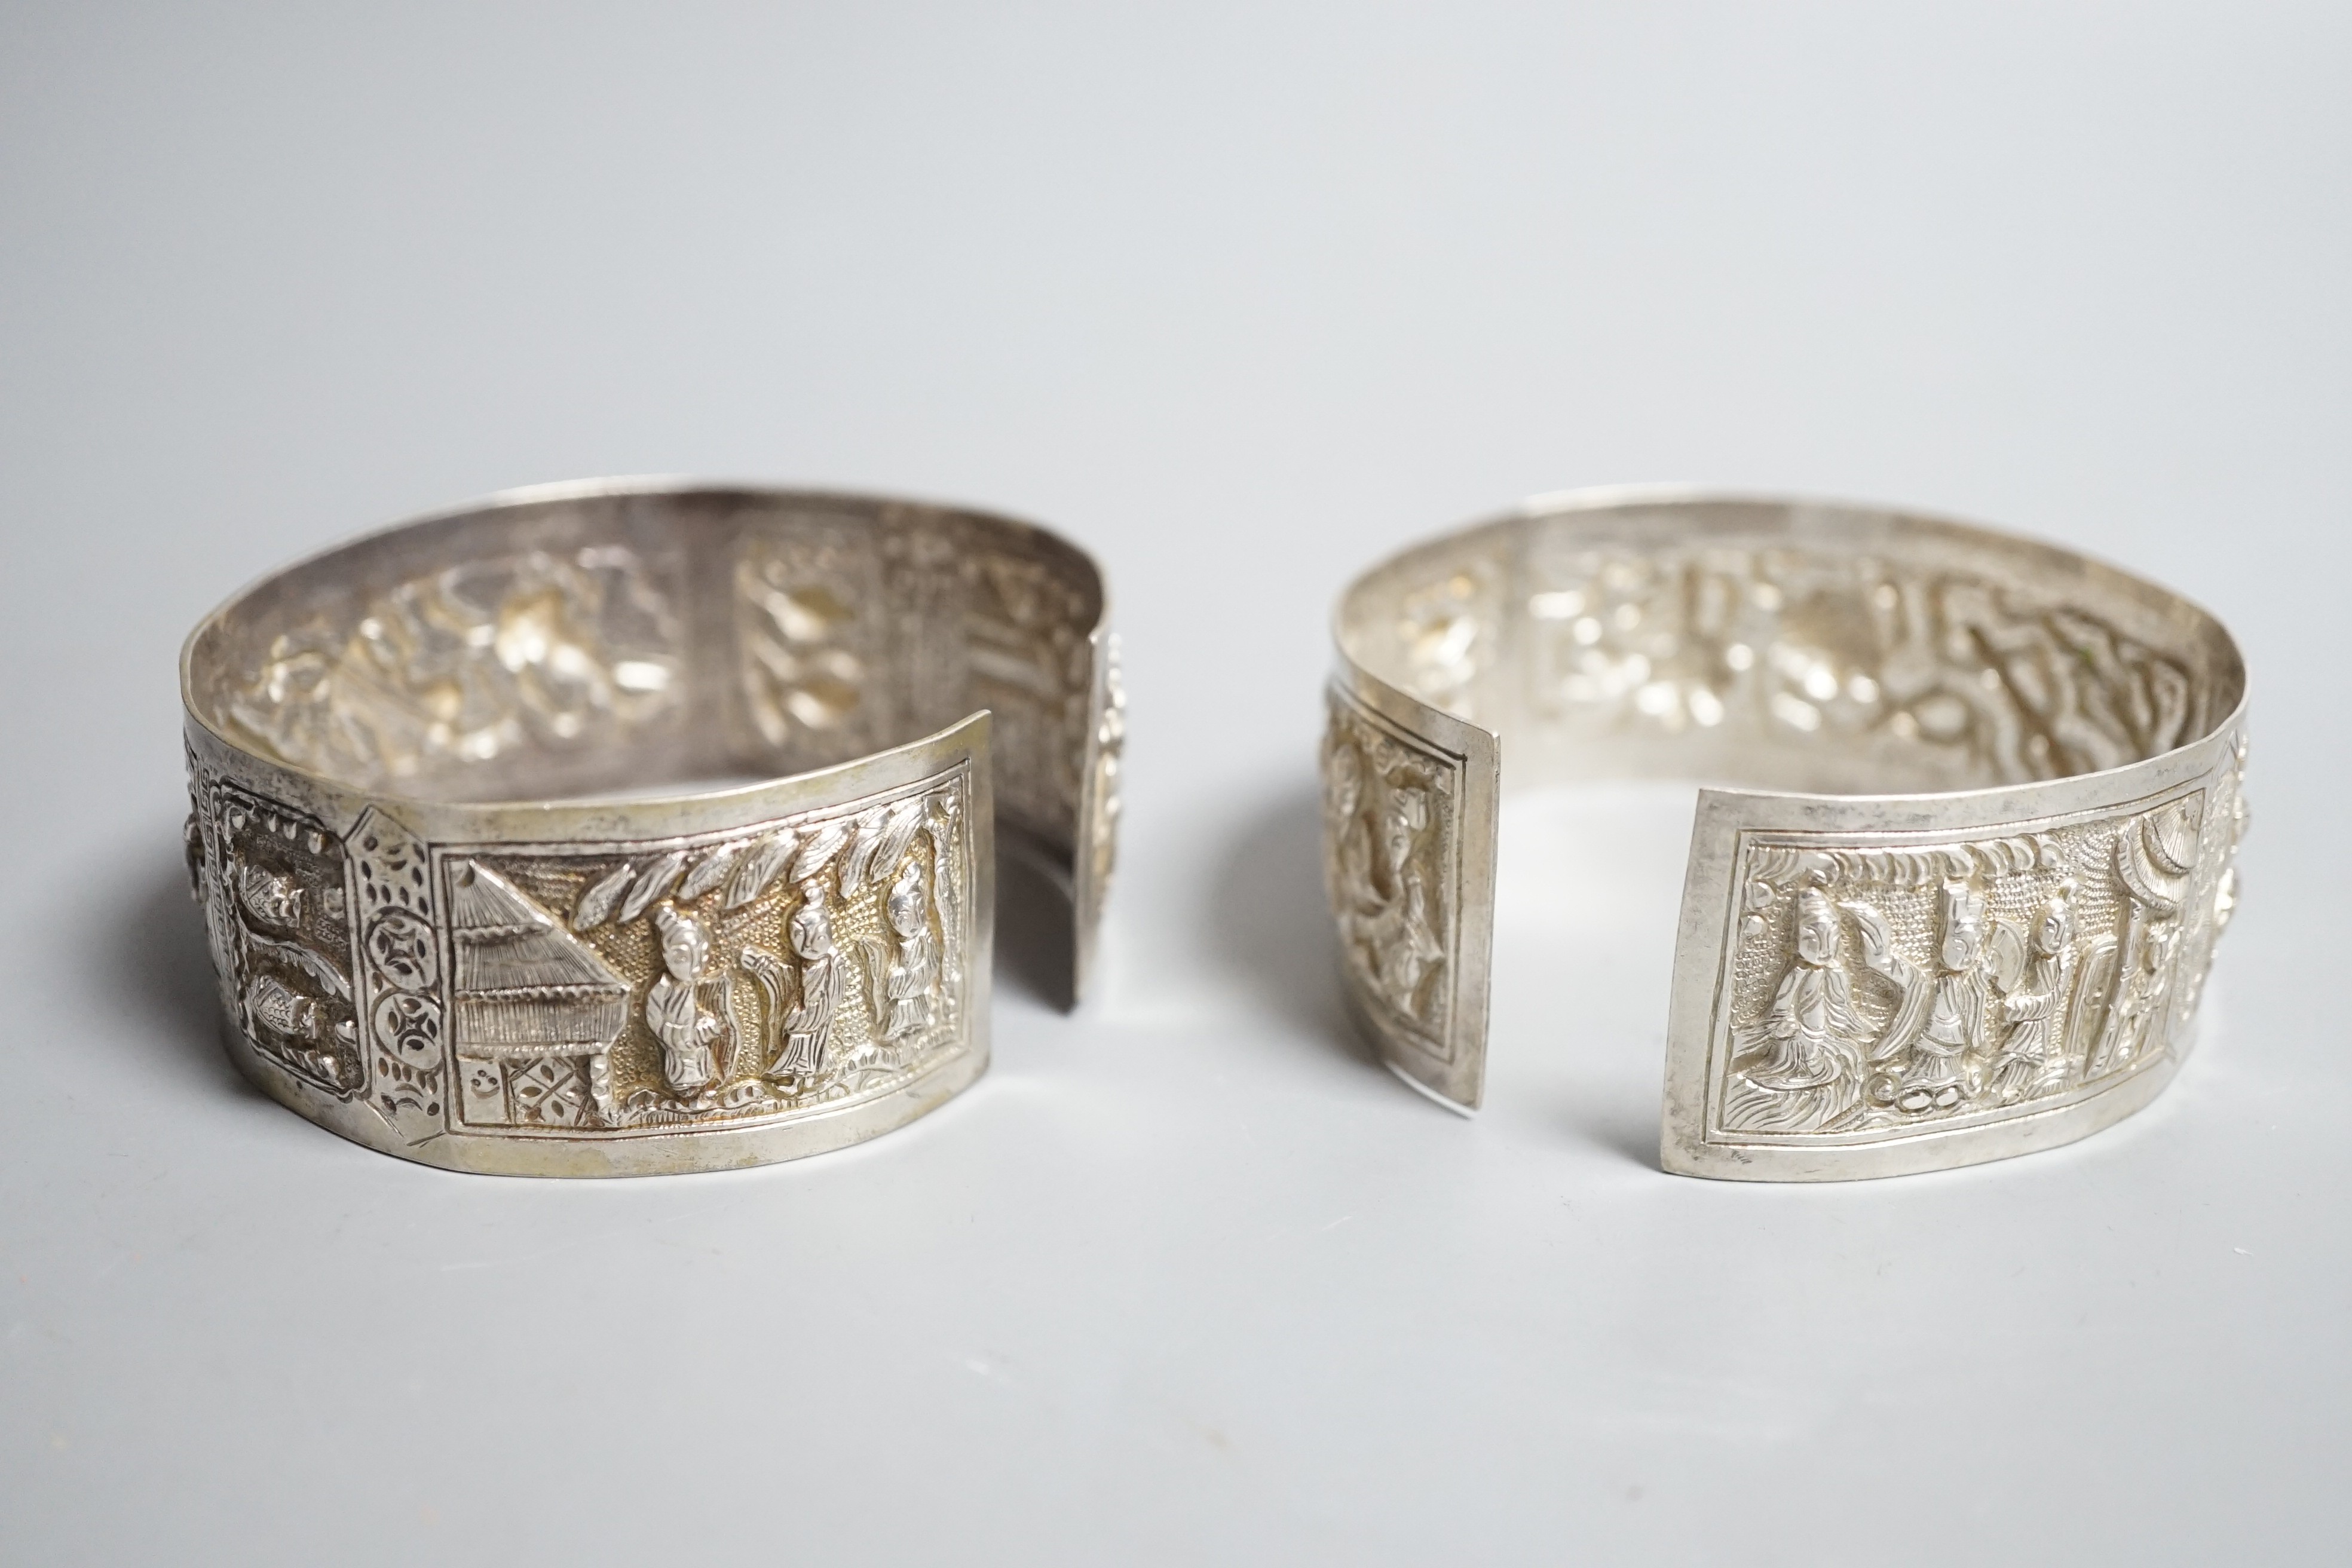 A pair of early 20th century Chinese white metal bangles